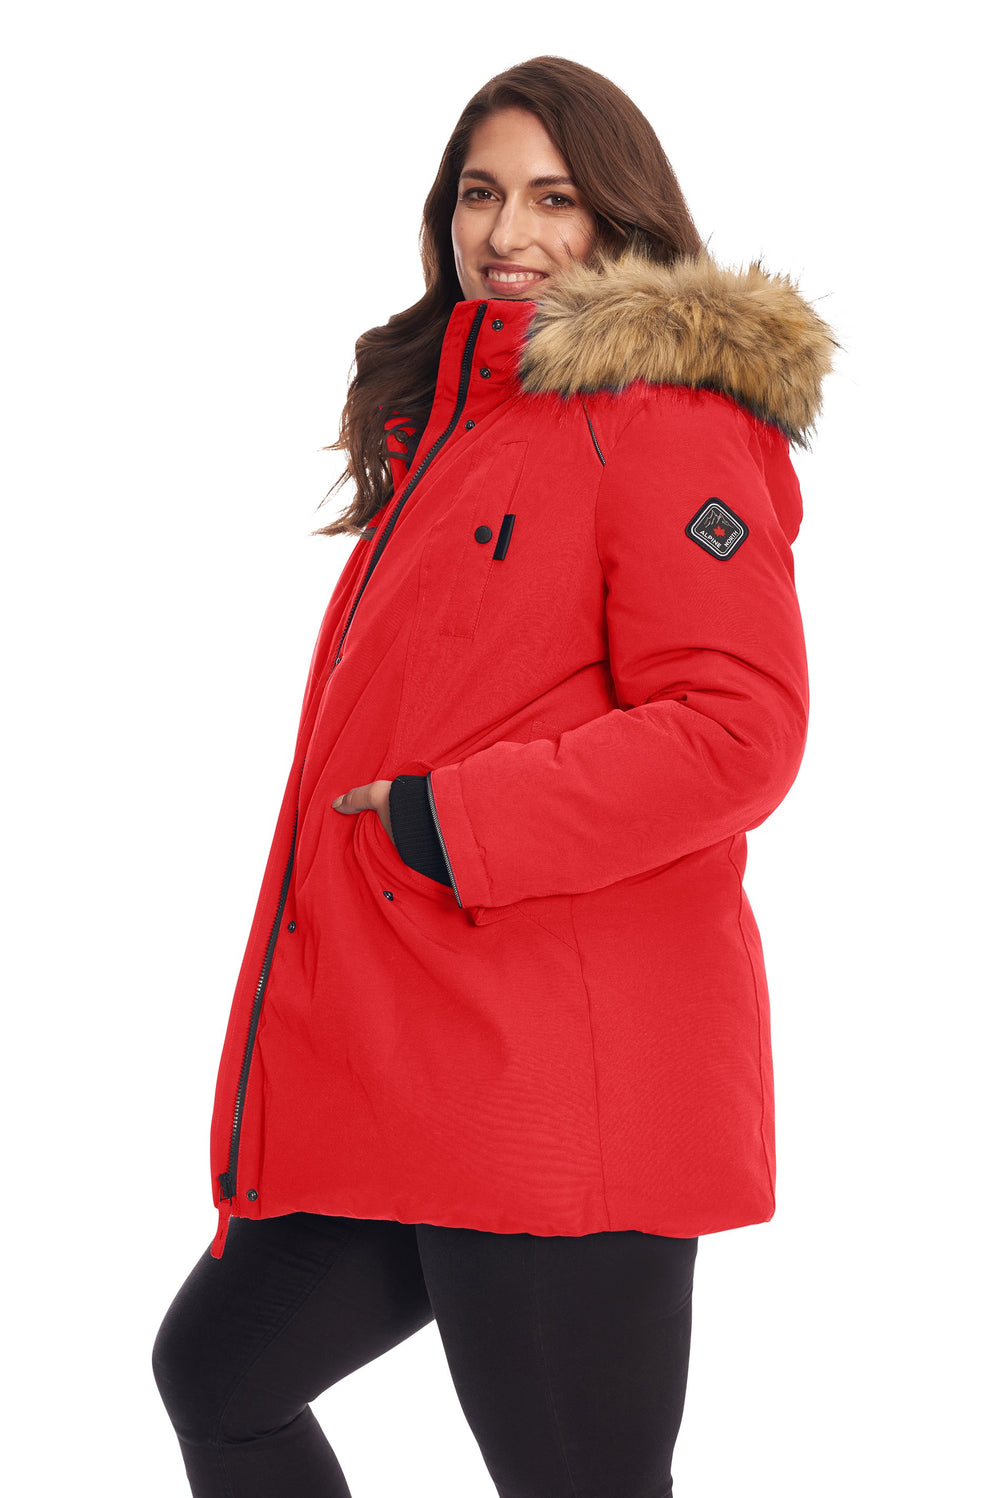 Entyinea Womens Plus Size Puffer Jacket Waterproof Thicken Parka Warm Snow  Jacket with Removable Hood White XS 